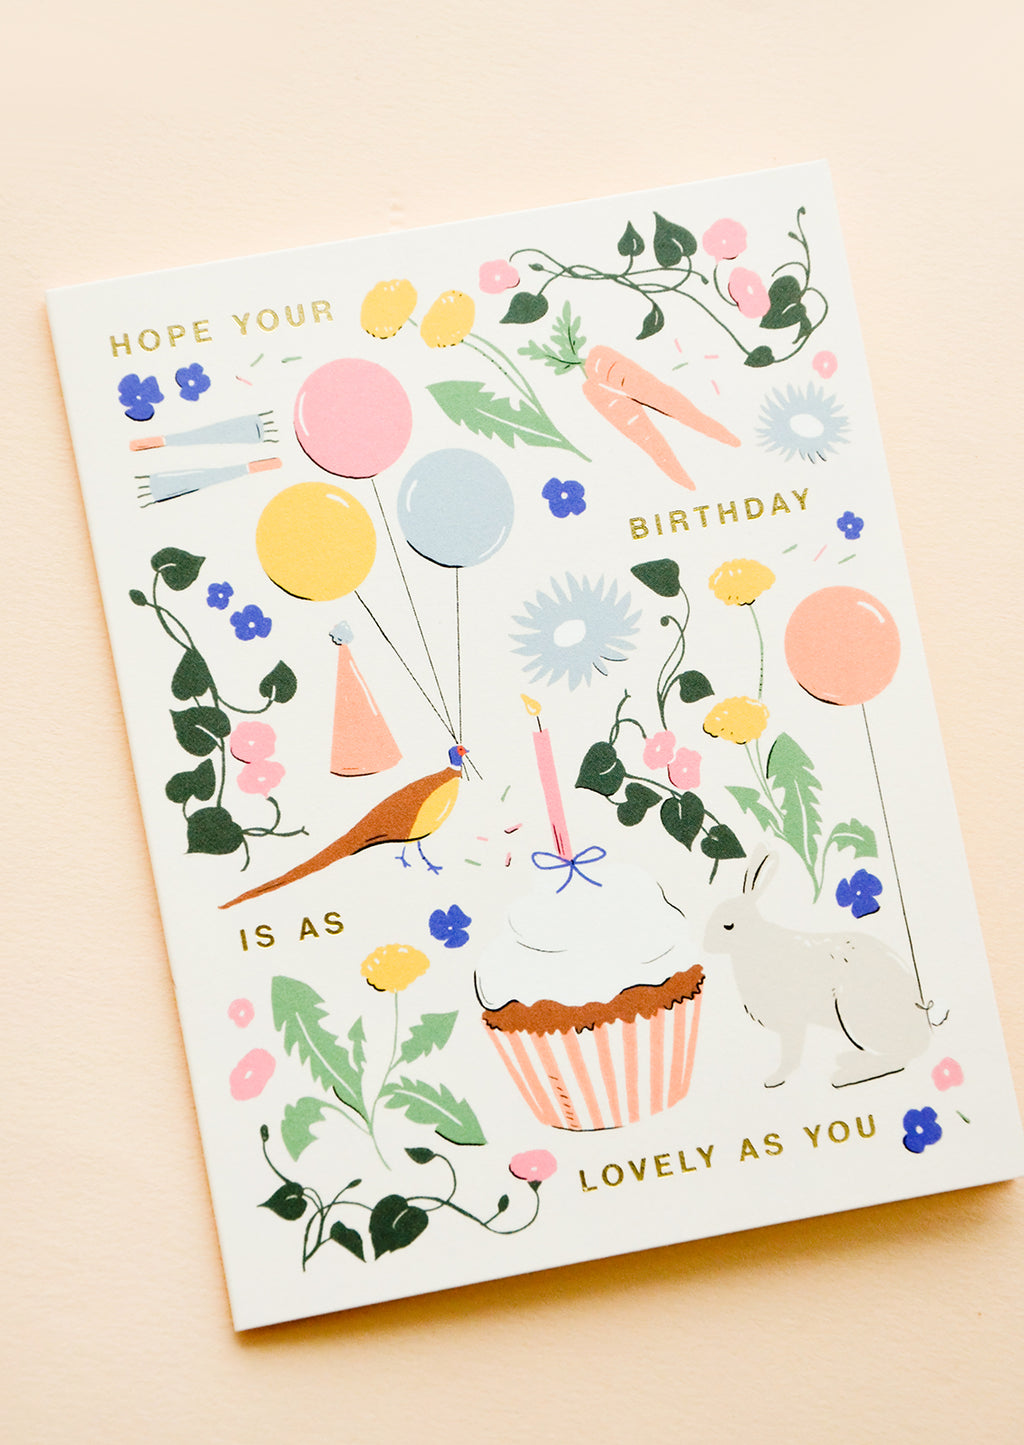 1: Whimsically illustrated greeting card with garden-centric scene and golden lettering reading "Hope your birthday is as lovely as you"